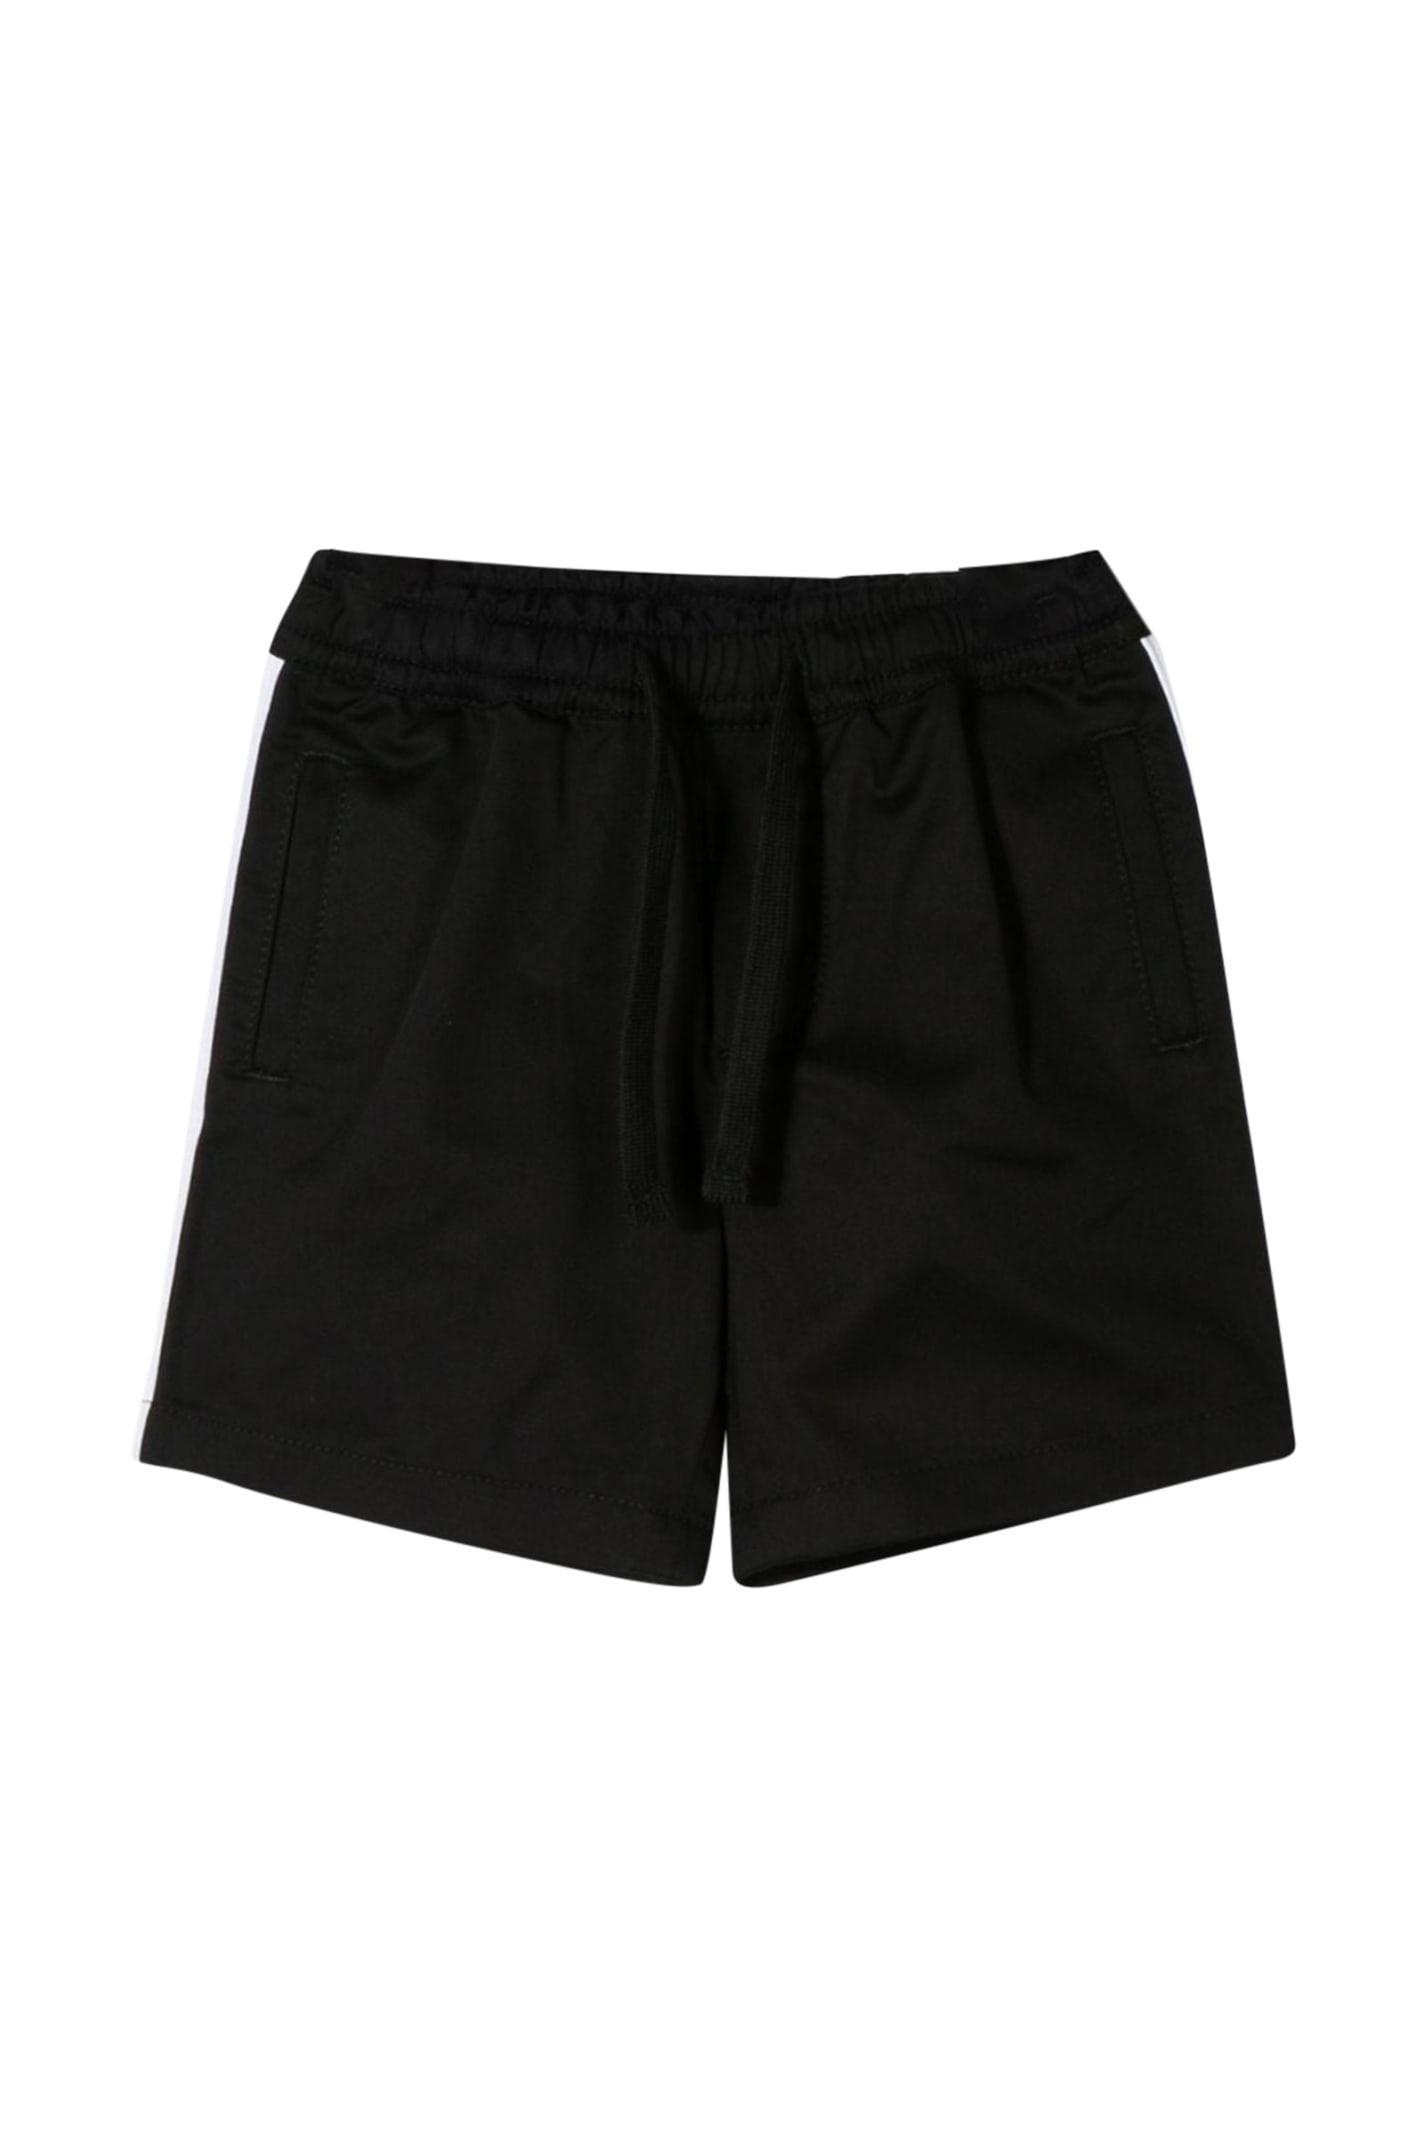 DOLCE & GABBANA SPORT SHORTS WITH SIDE BAND,11261970